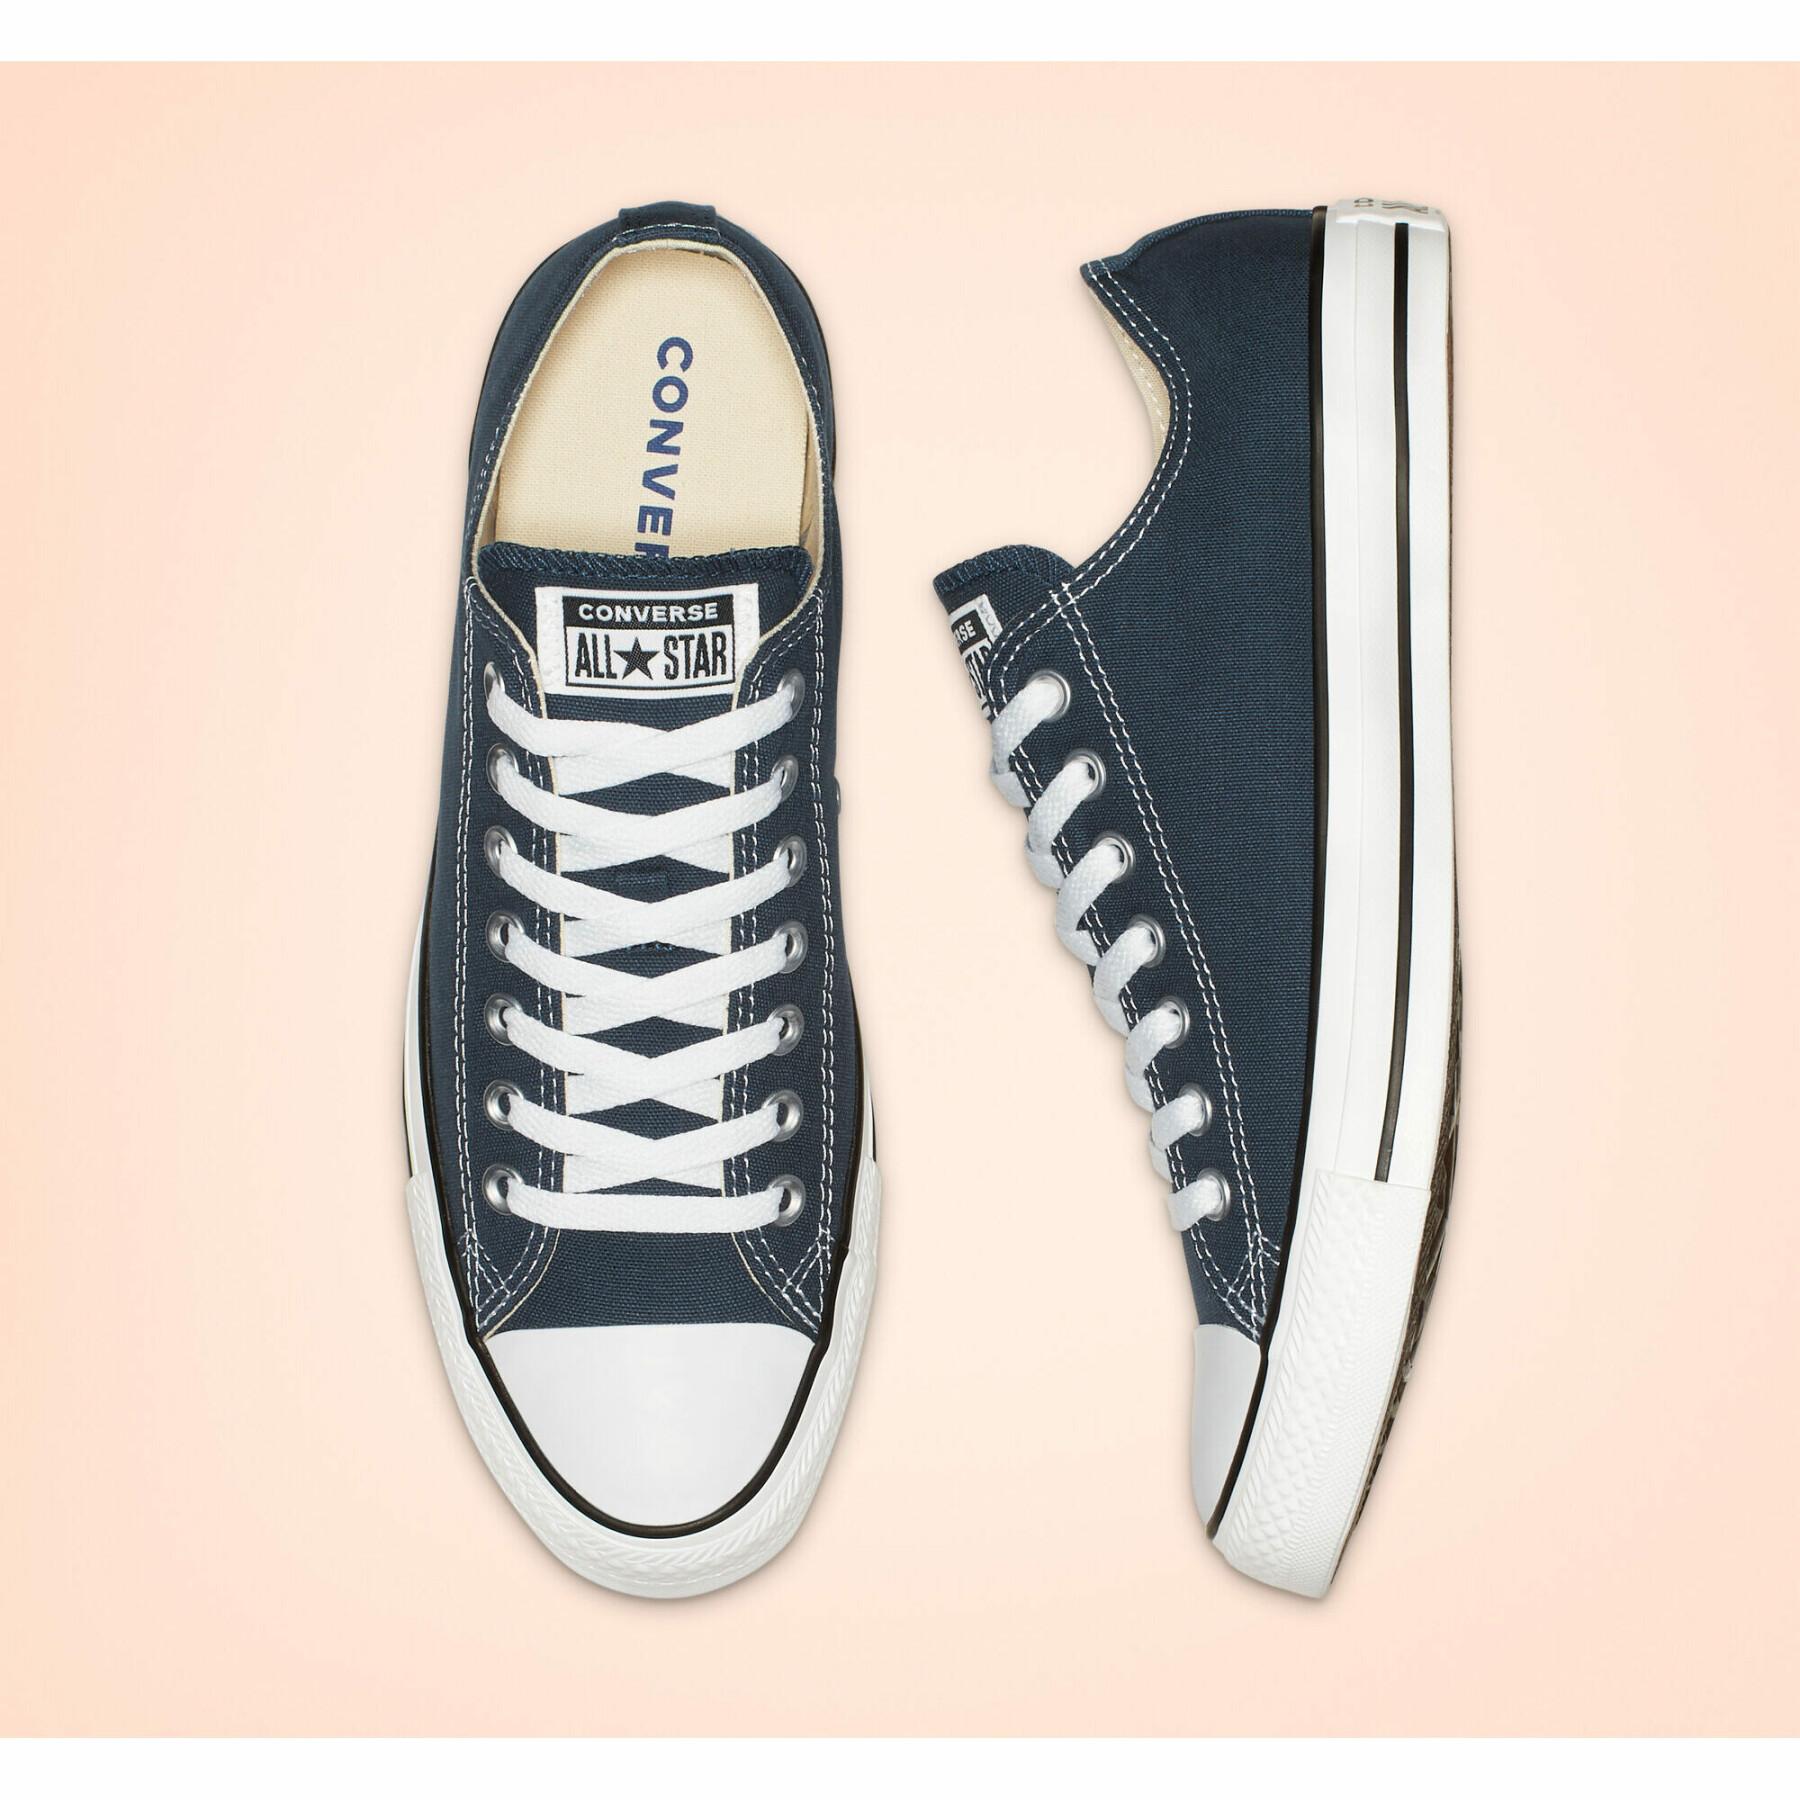 Sneakers Converse Chuck Taylor All Star classic - Other - Sneakers -  Lifestyle